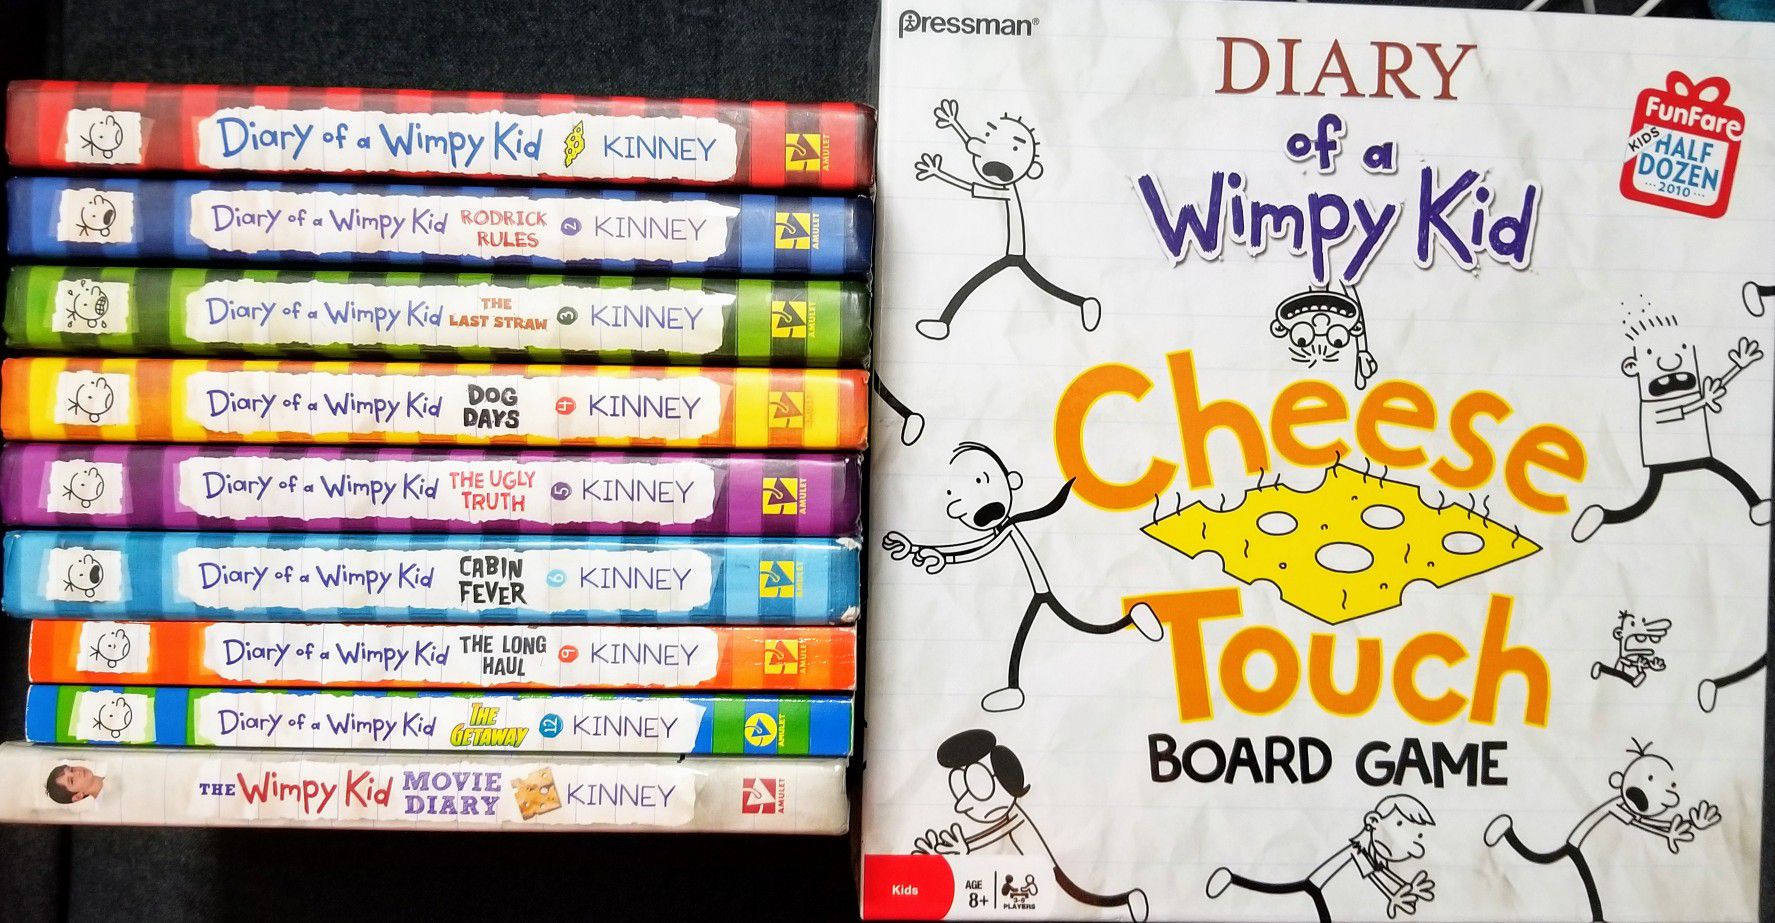 Diary of a Wimpy kid books & board game $30